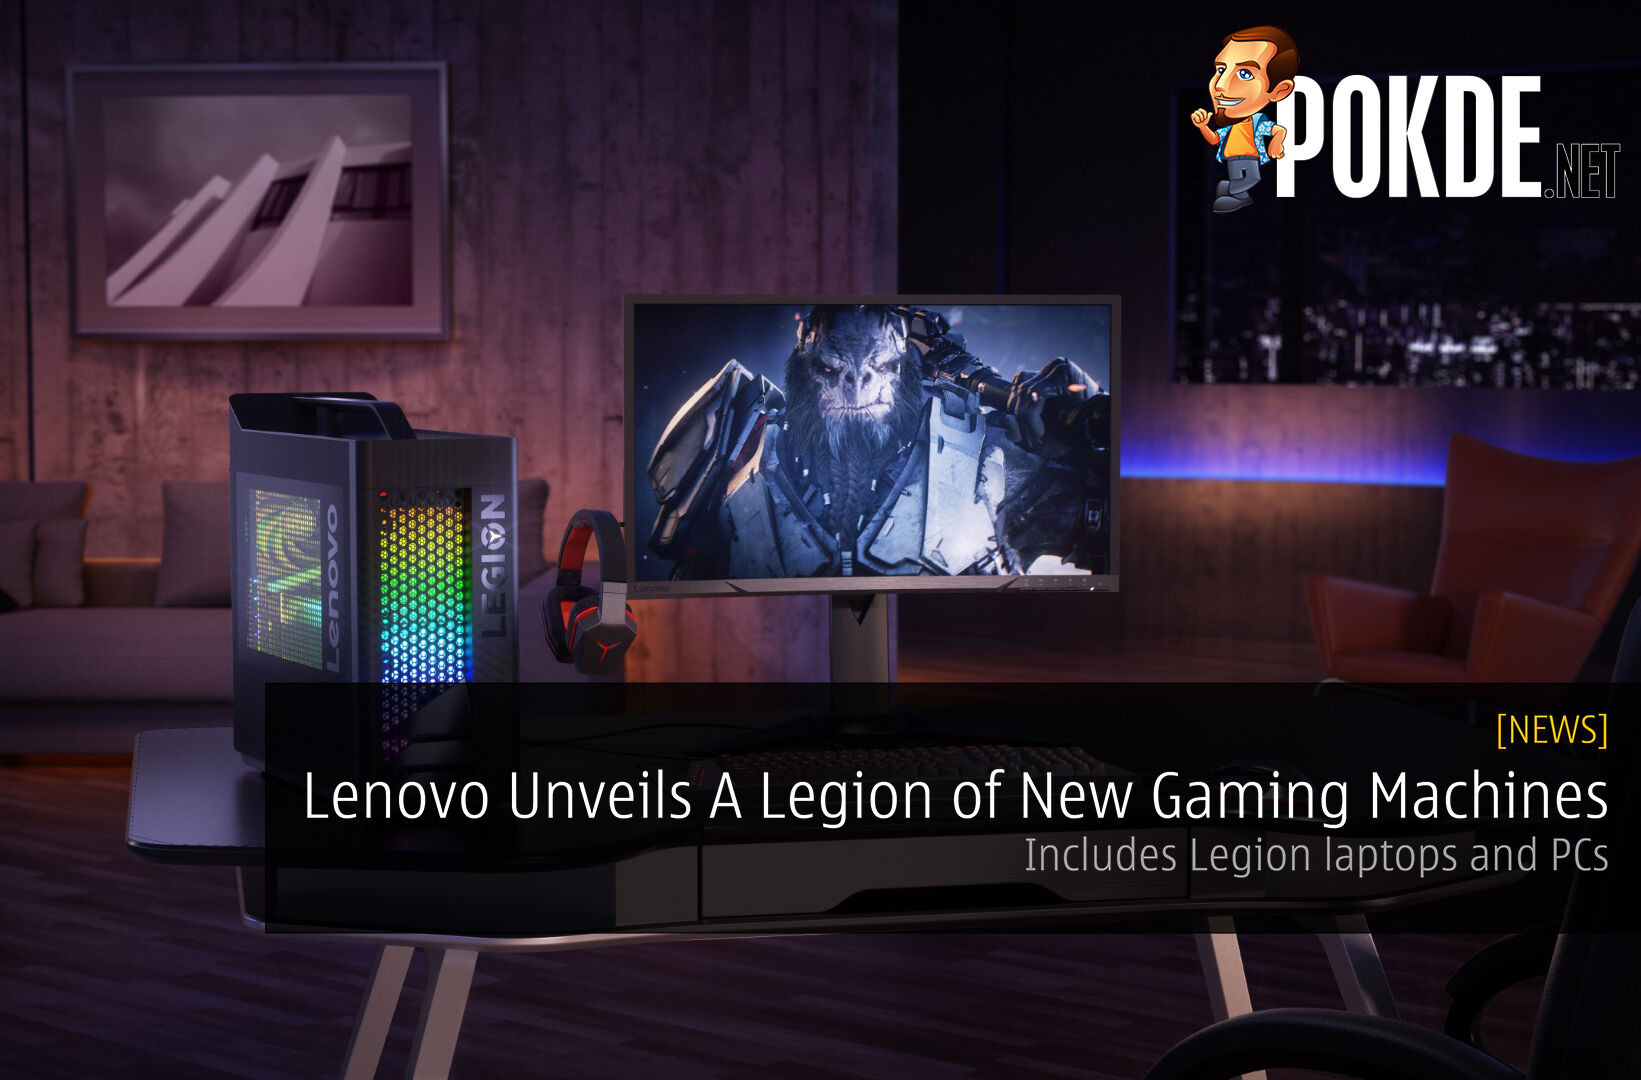 Lenovo Unveils A Legion of New Gaming Machines - Includes Legion laptops and PCs 19